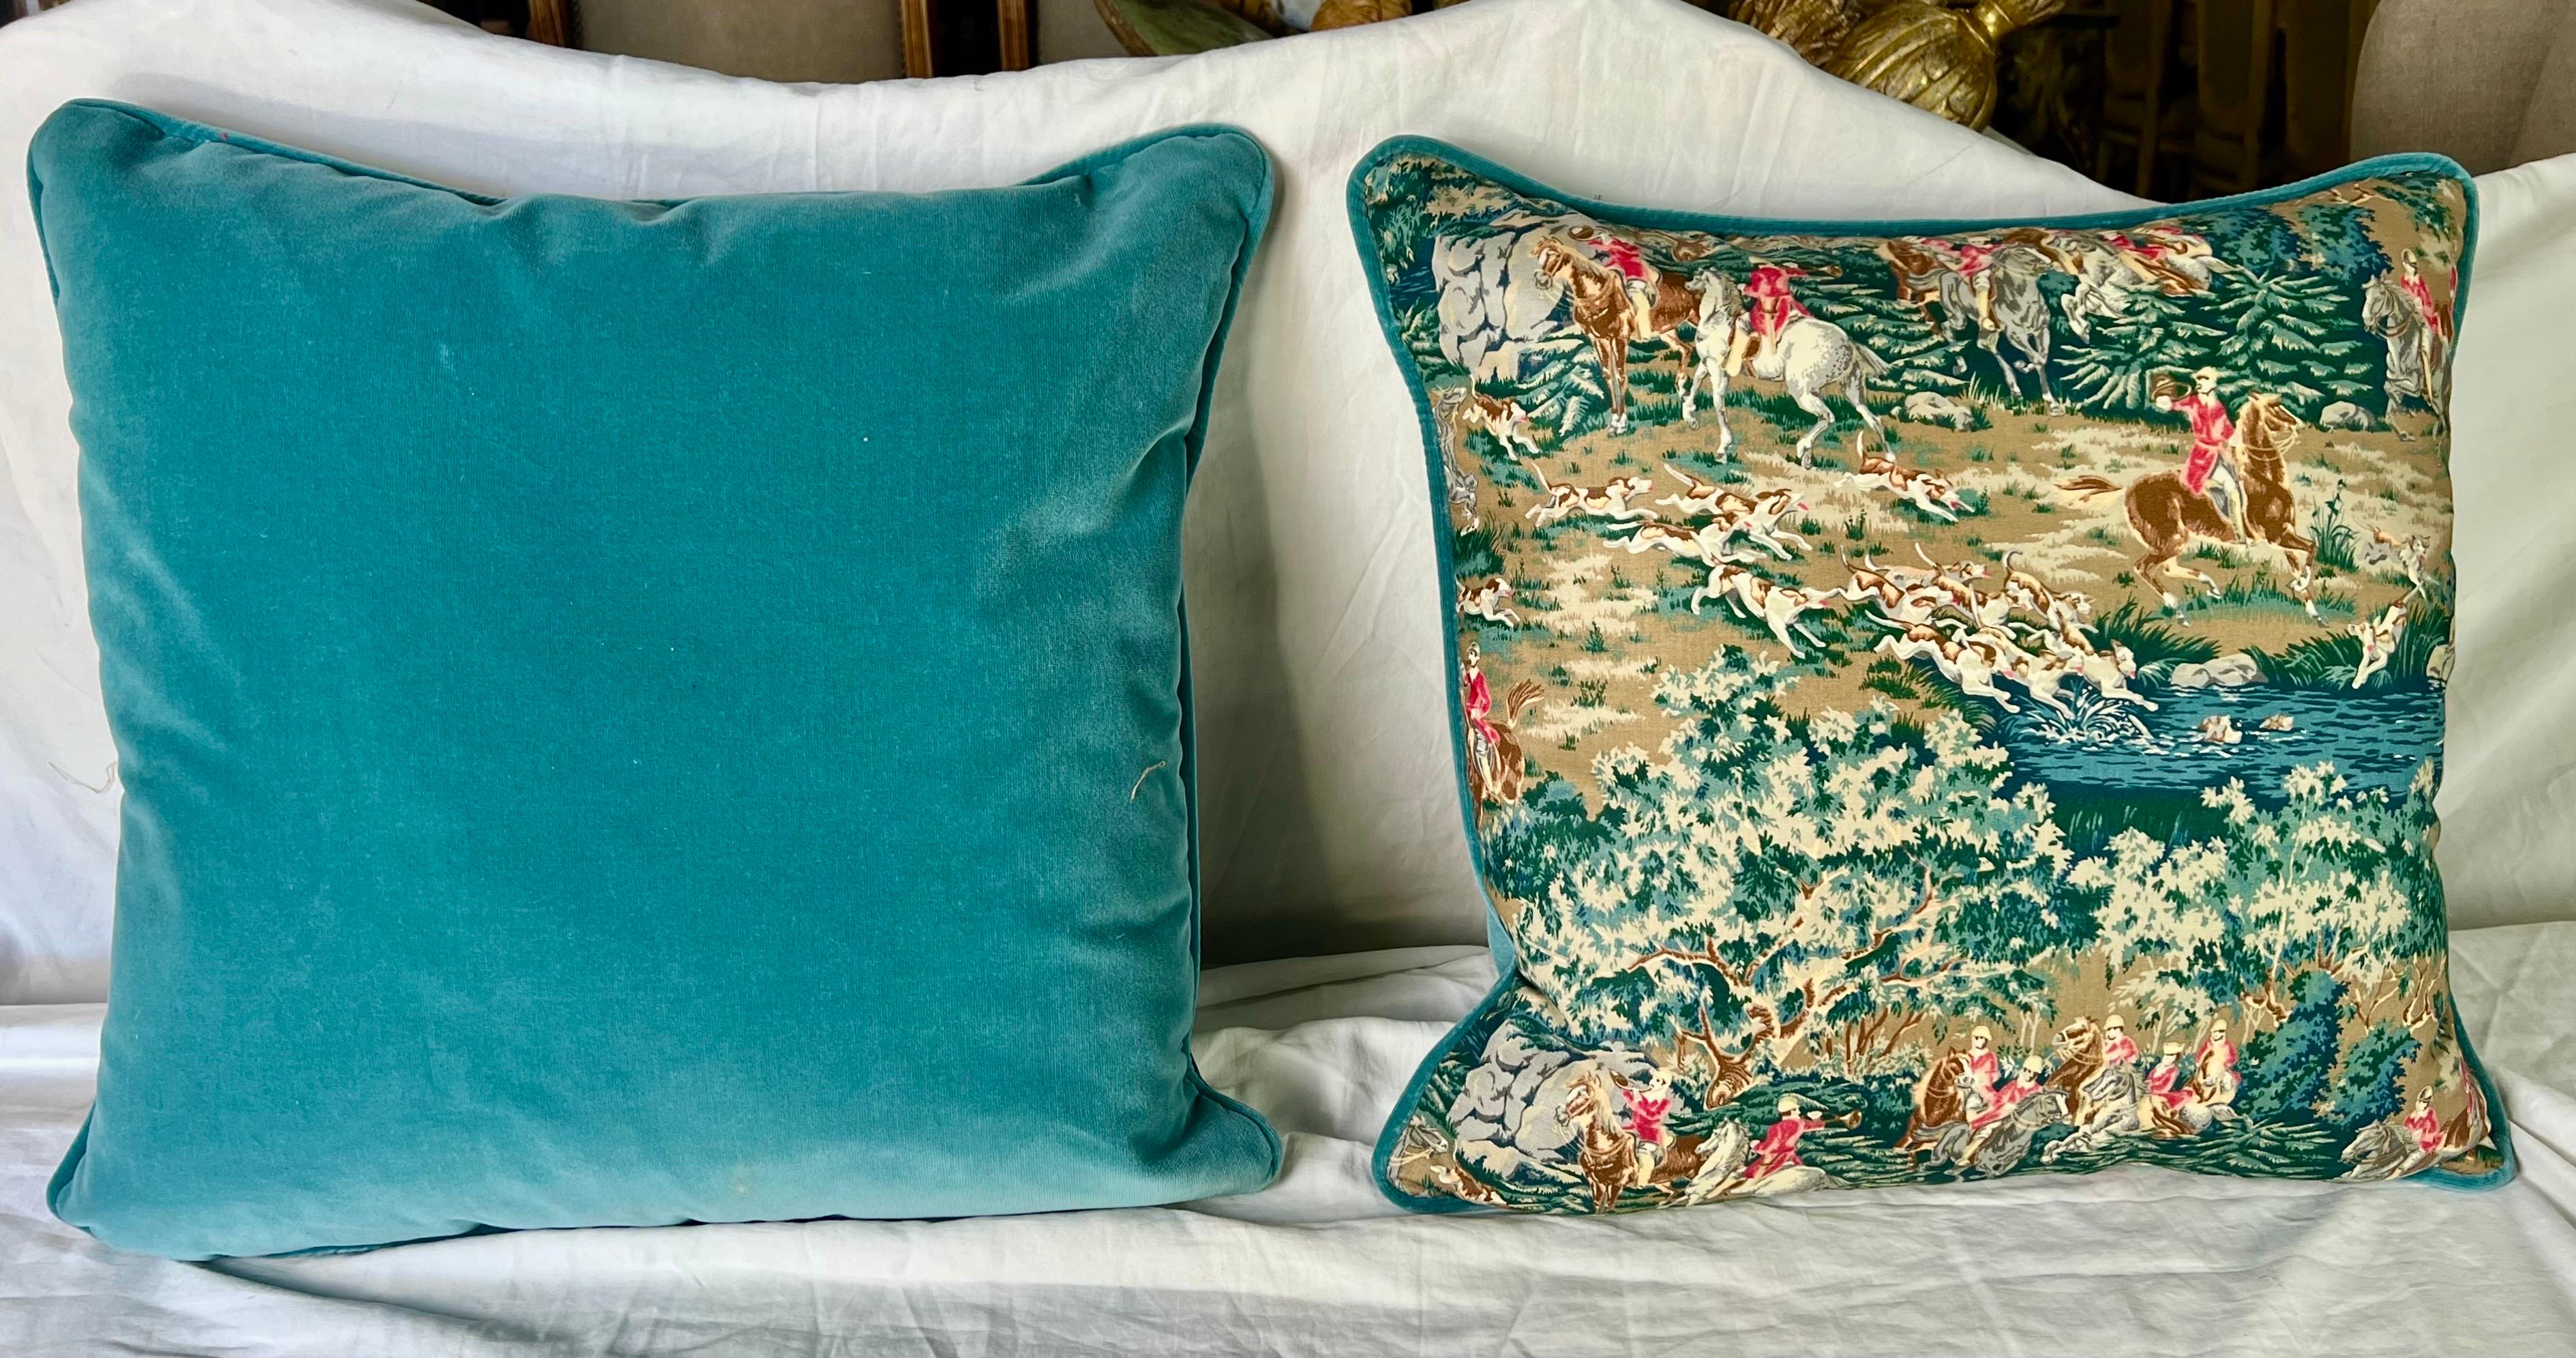 The English-style pillows featuring hunting scenes with horses and dogs in green, red and brown, along with green teal velvet backs and down-filled inserts, bring a touch of classic elegance and countryside charm to your decor.